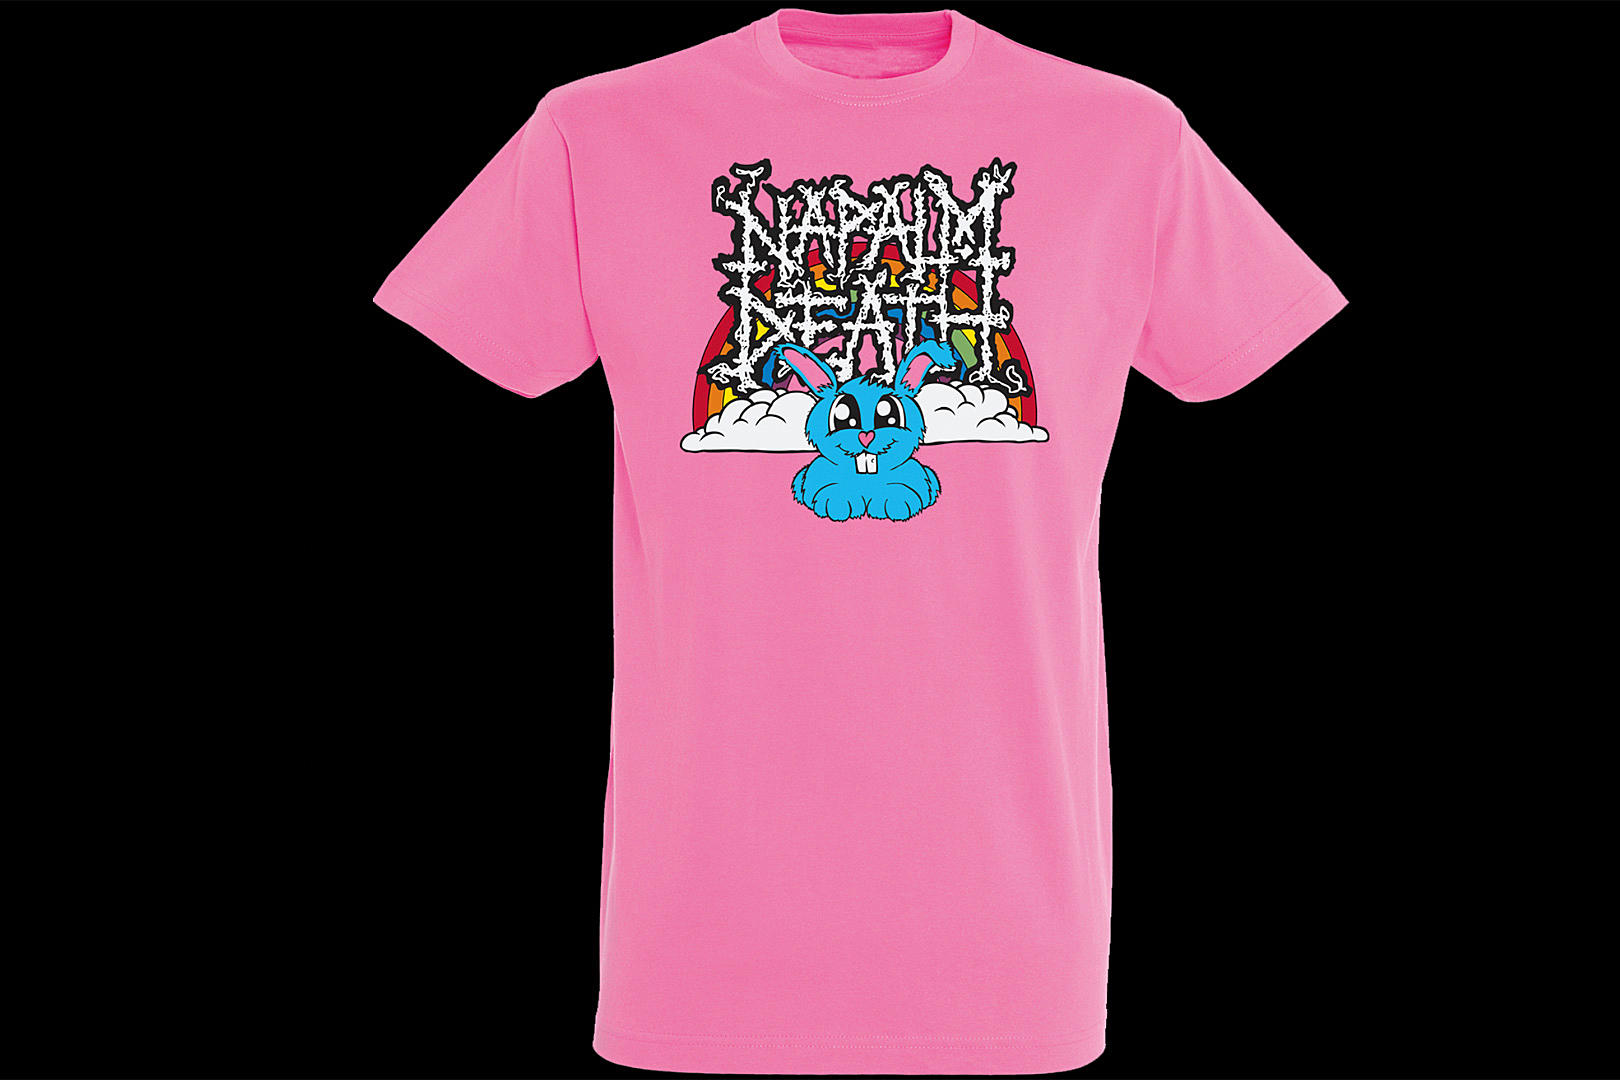 Napalm Death Releasing Most Adorable Metal T-Shirt Ever